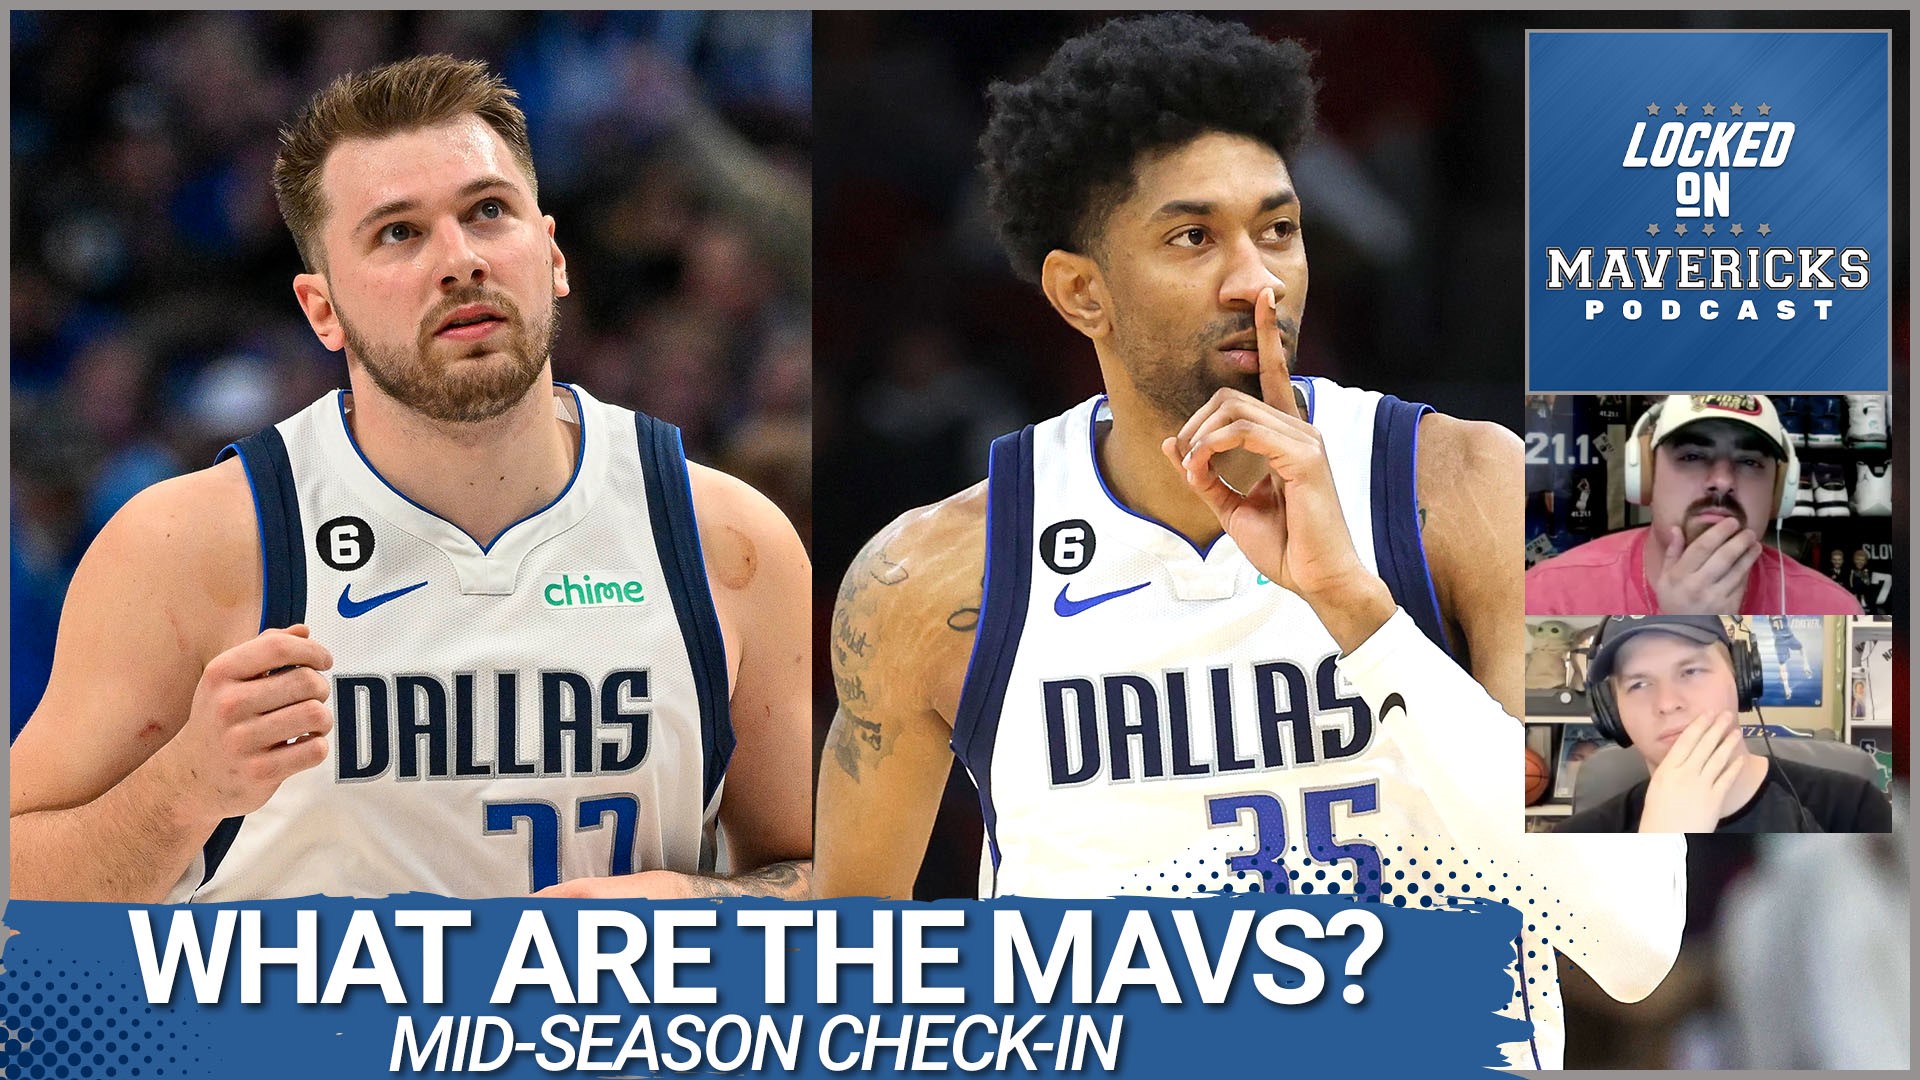 Nick Angstadt & Isaac Harris take a midseason physical of the Dallas Mavericks. How are the 2022-23 Mavs different than the 2021-22 Mavs?